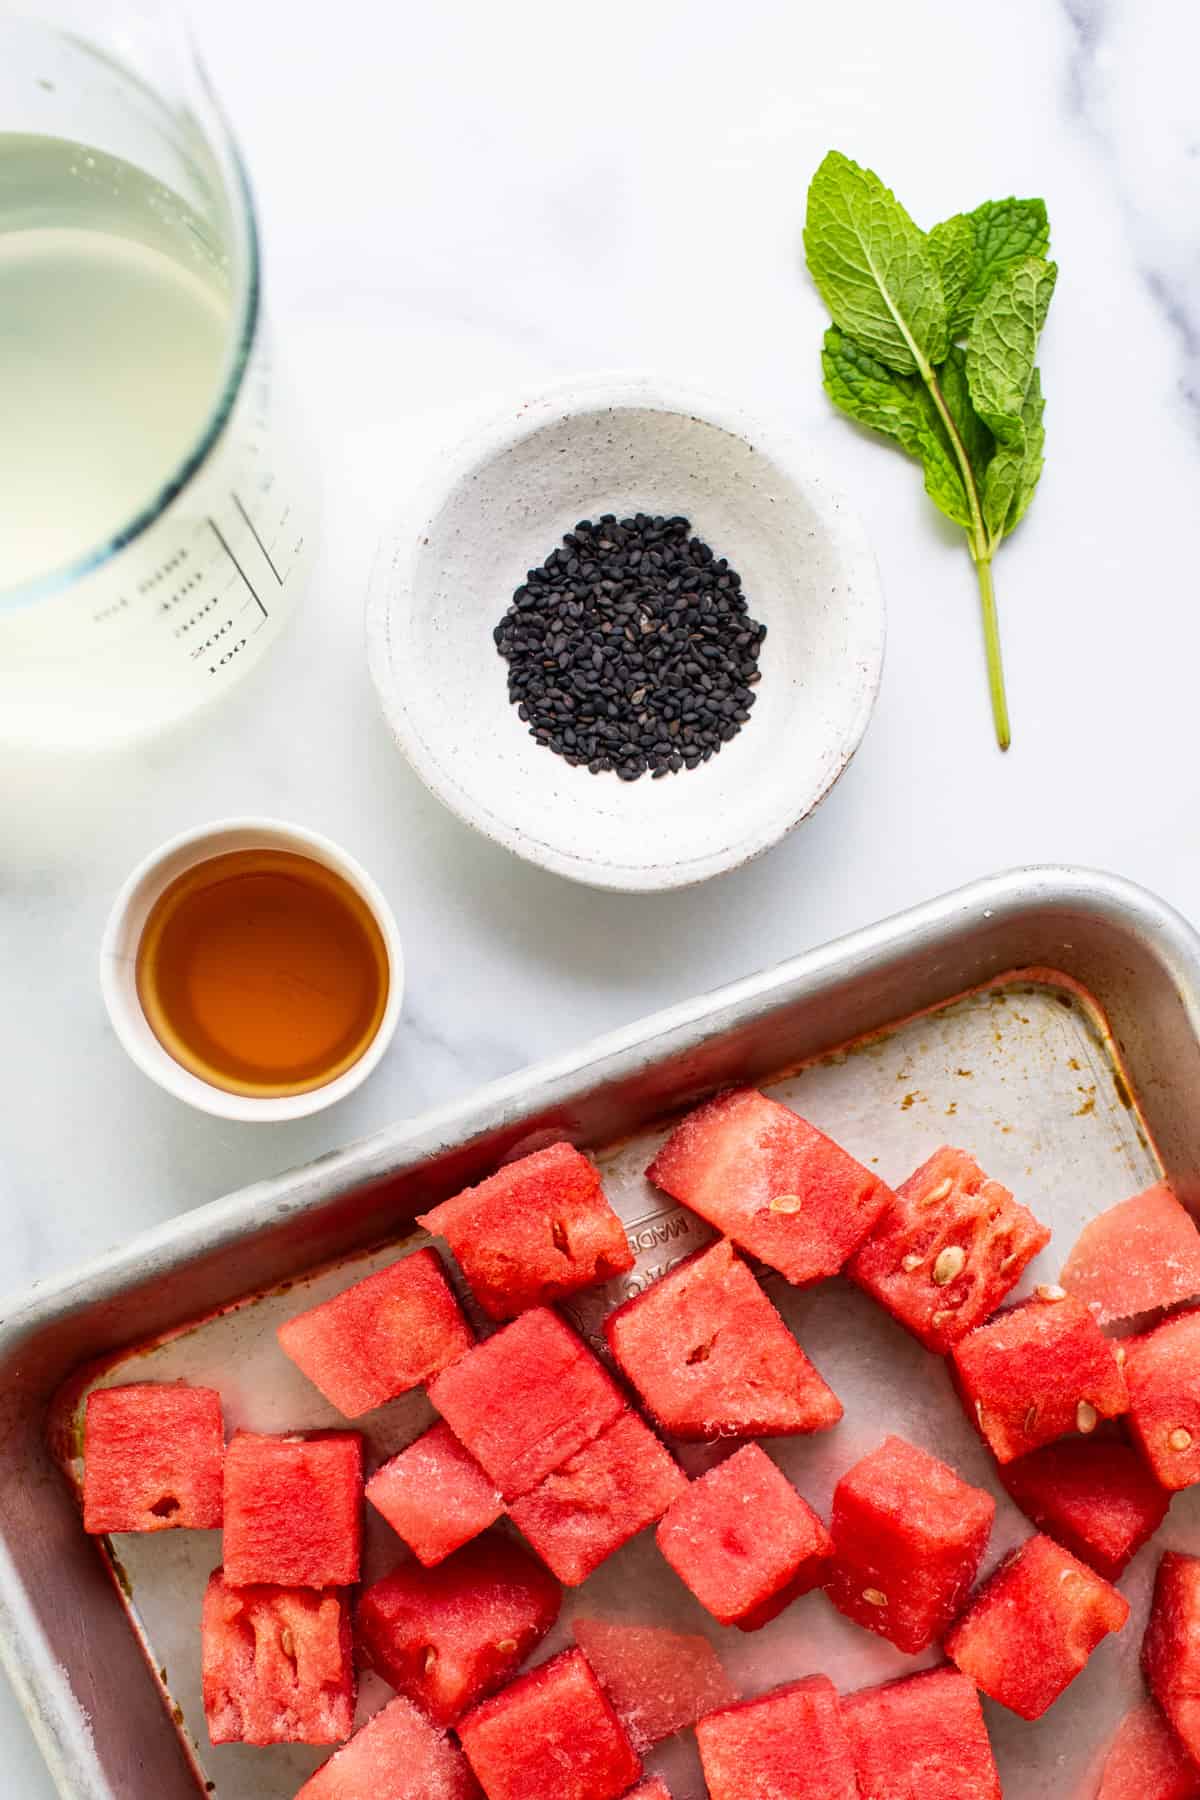 A tray of diced watermelon, a small bowl of black sesame seeds, a sprig of mint, a container of honey, and a glass of a pale beverage on a white surface.